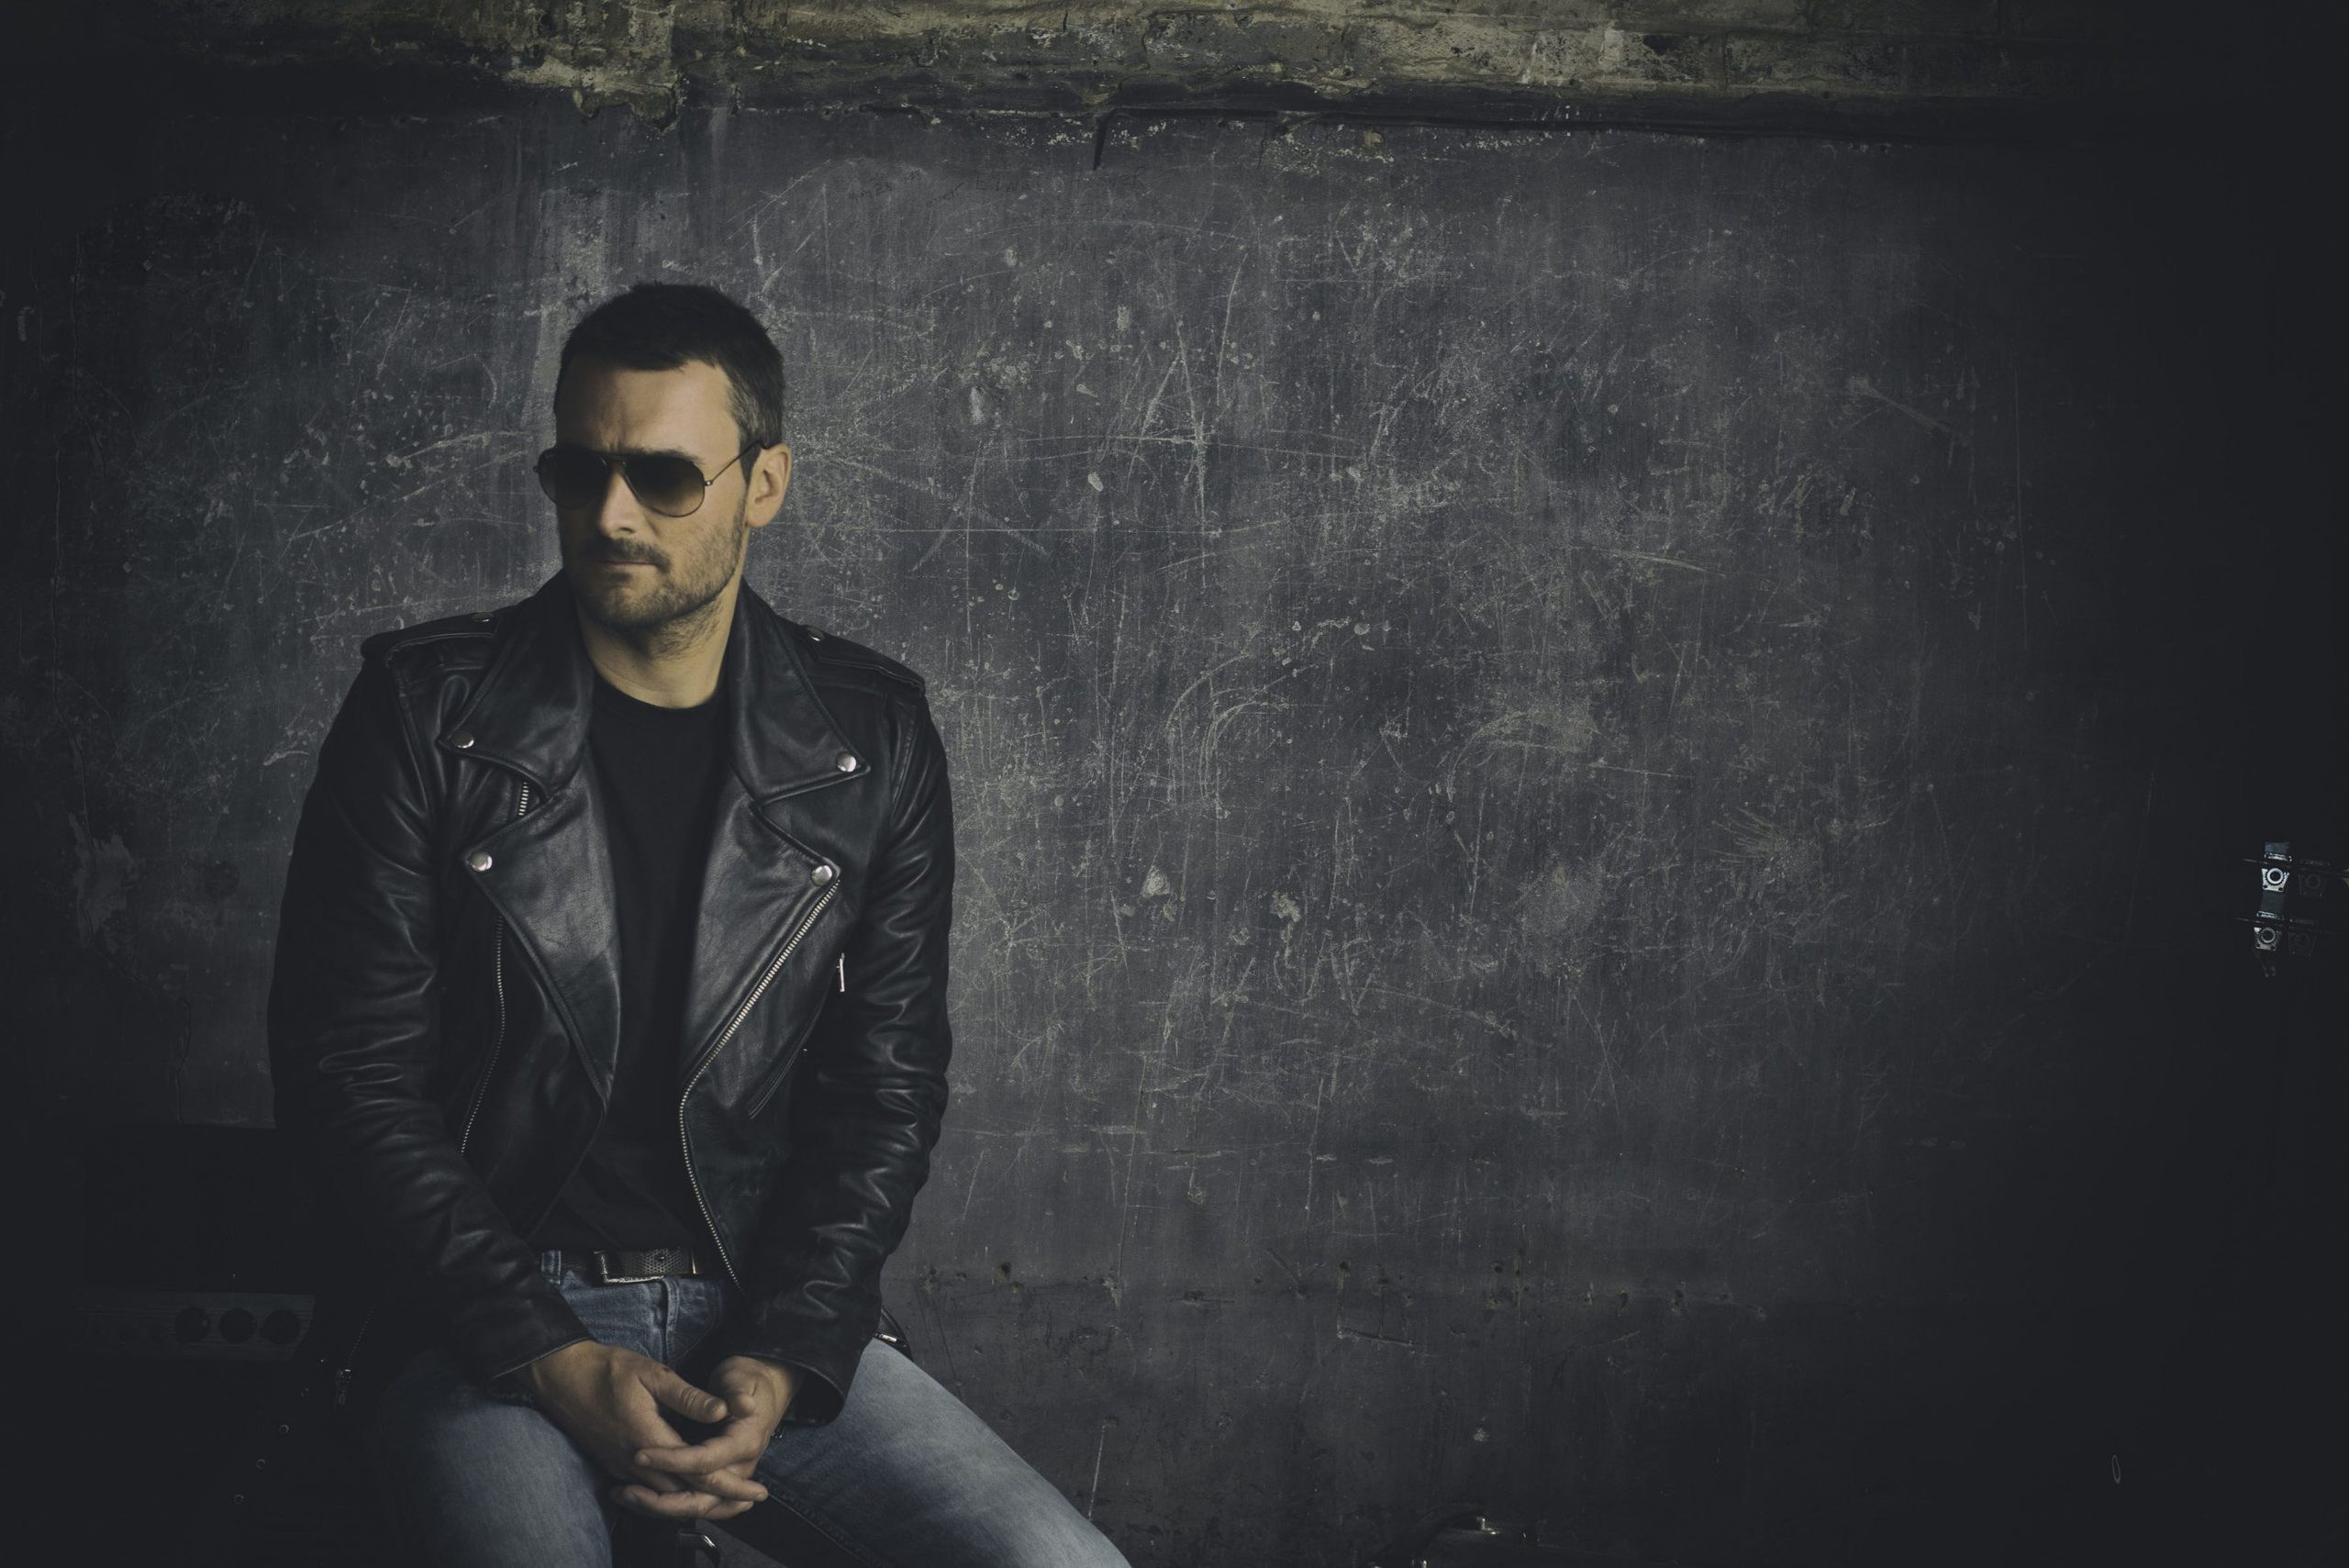 ERIC CHURCH’S “RECORD YEAR” TAPPED FOR SECOND SINGLE